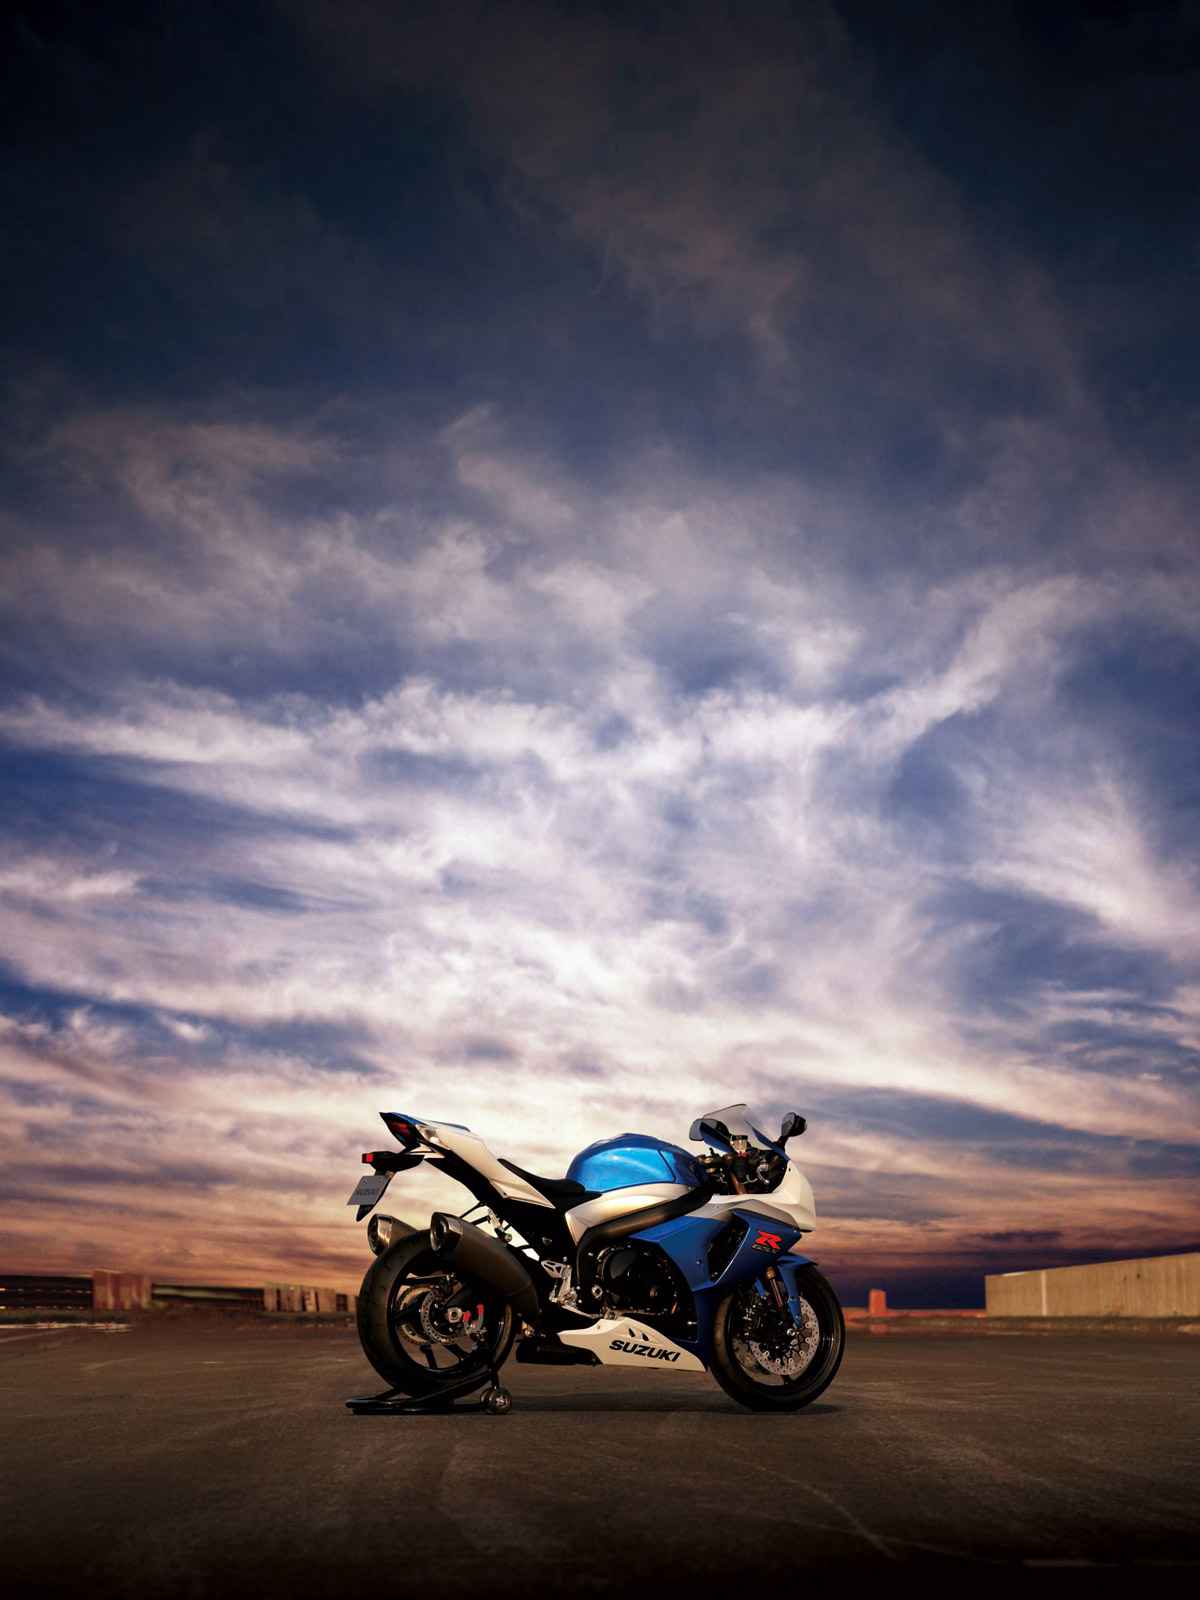 Gxr1000 Wallpapers